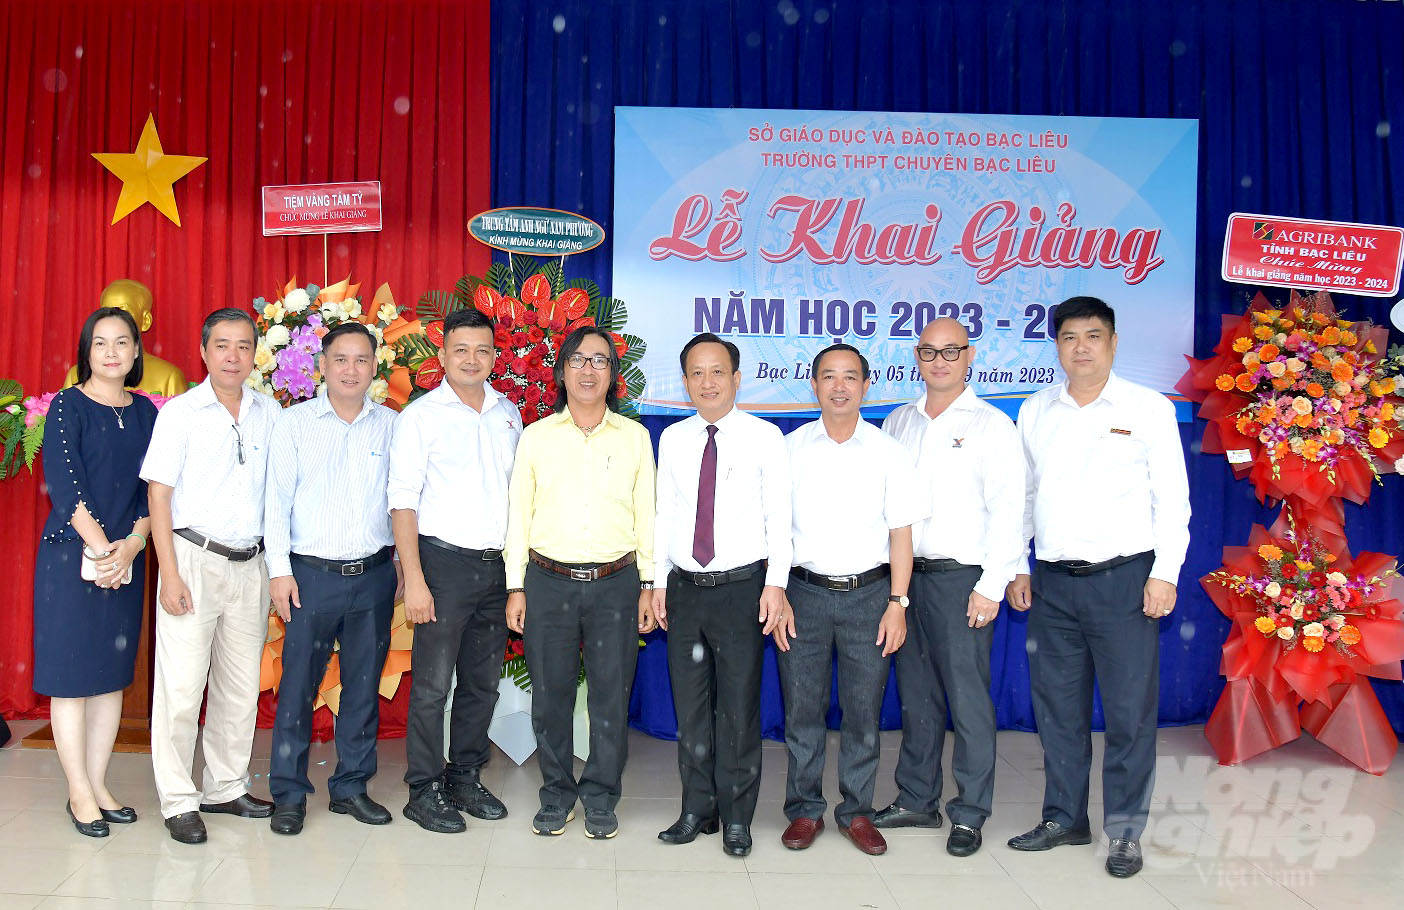 Mr. Pham Van Thieu, Chairman of Bac Lieu Provincial People's Committee (fourth from the right) took a commemorative photo with representatives of Vietnam Agriculture News and some officials and employees of GrowMax Group on the opening day of the new school year at Bac Lieu High School for the Gifted. Photo: Kieu Trang.